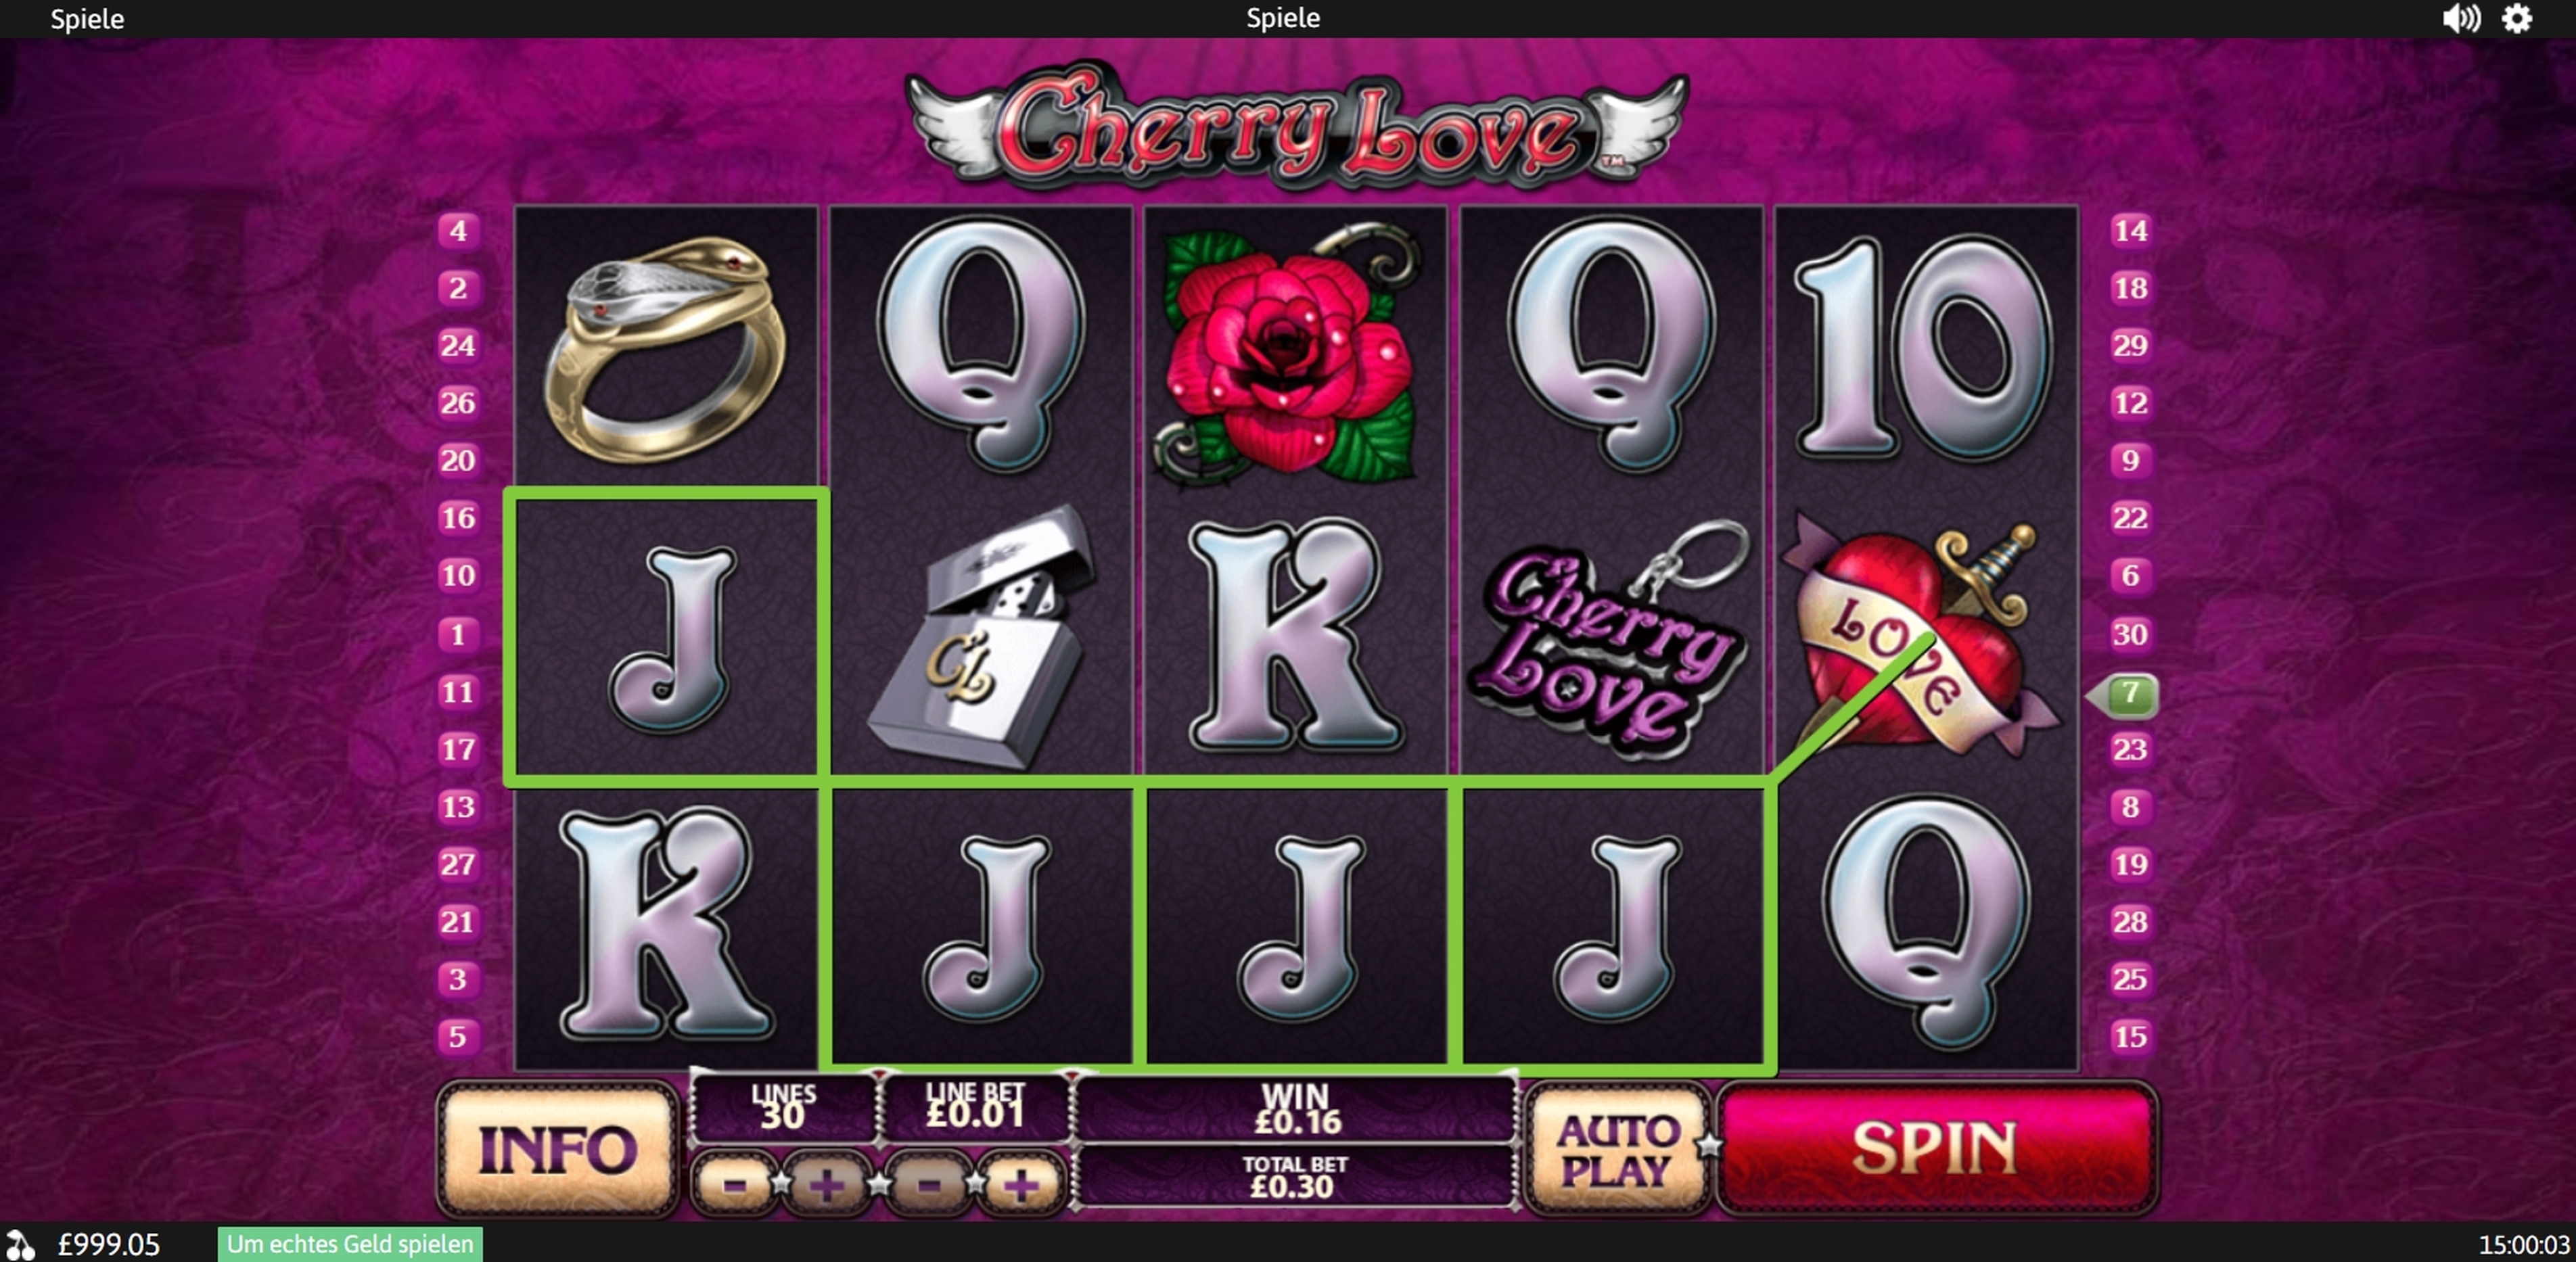 Win Money in Cherry Love Free Slot Game by Playtech